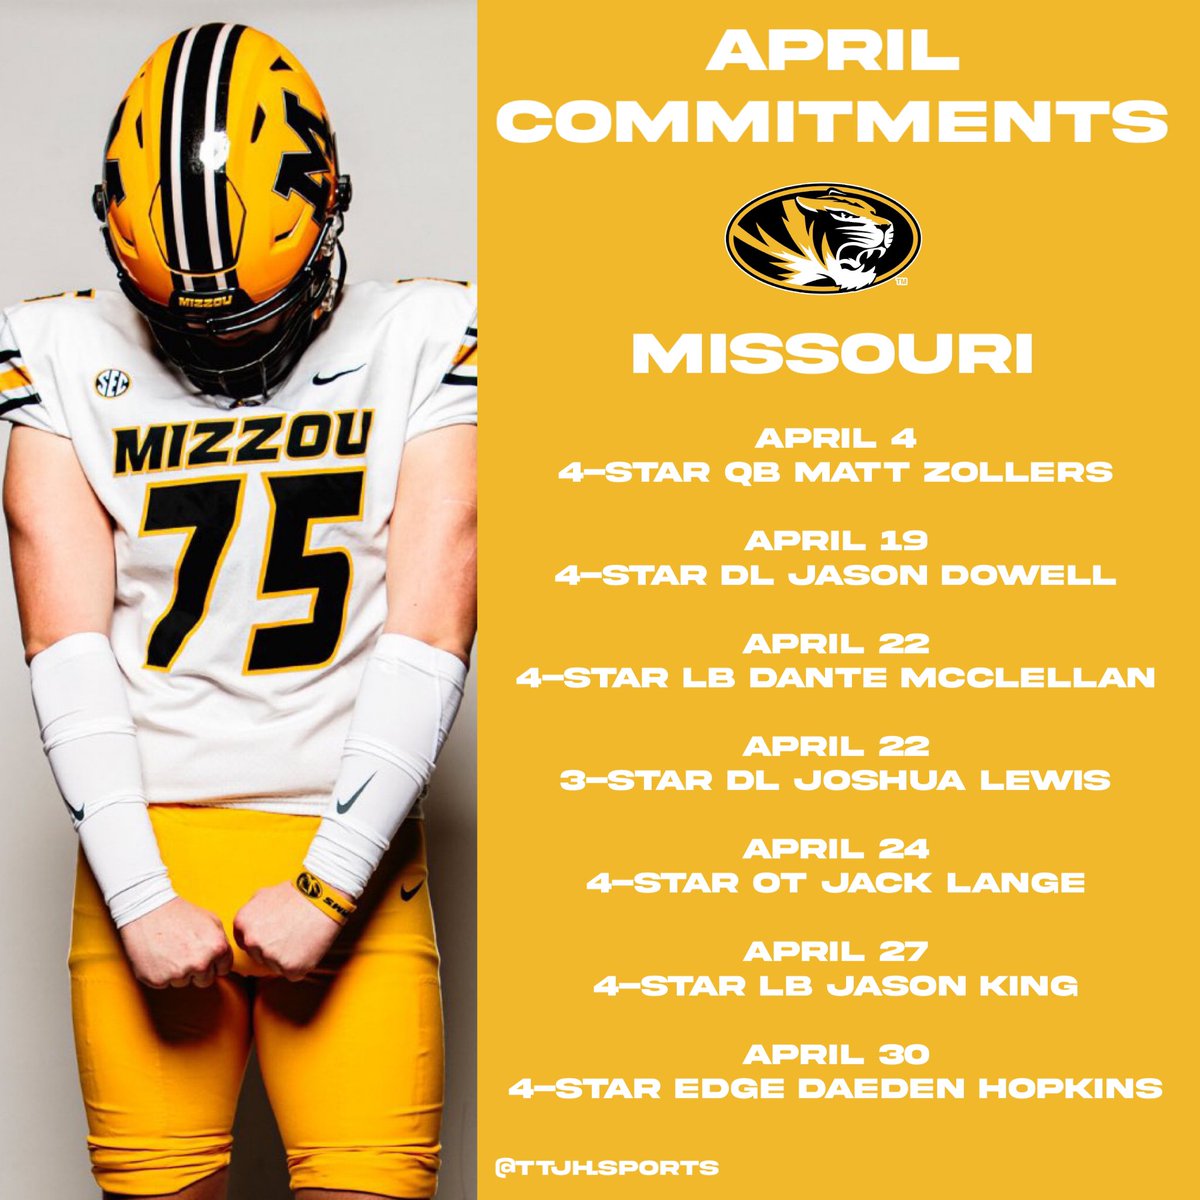 #Missouri had a big month of recruiting in the month of April, picking up 7 commitments for its Class of 2025. @MattZollers @JasonDo52403398 @dante__il @JLew999 @JackLange55 @Jking_023 @HopkinsDaeden